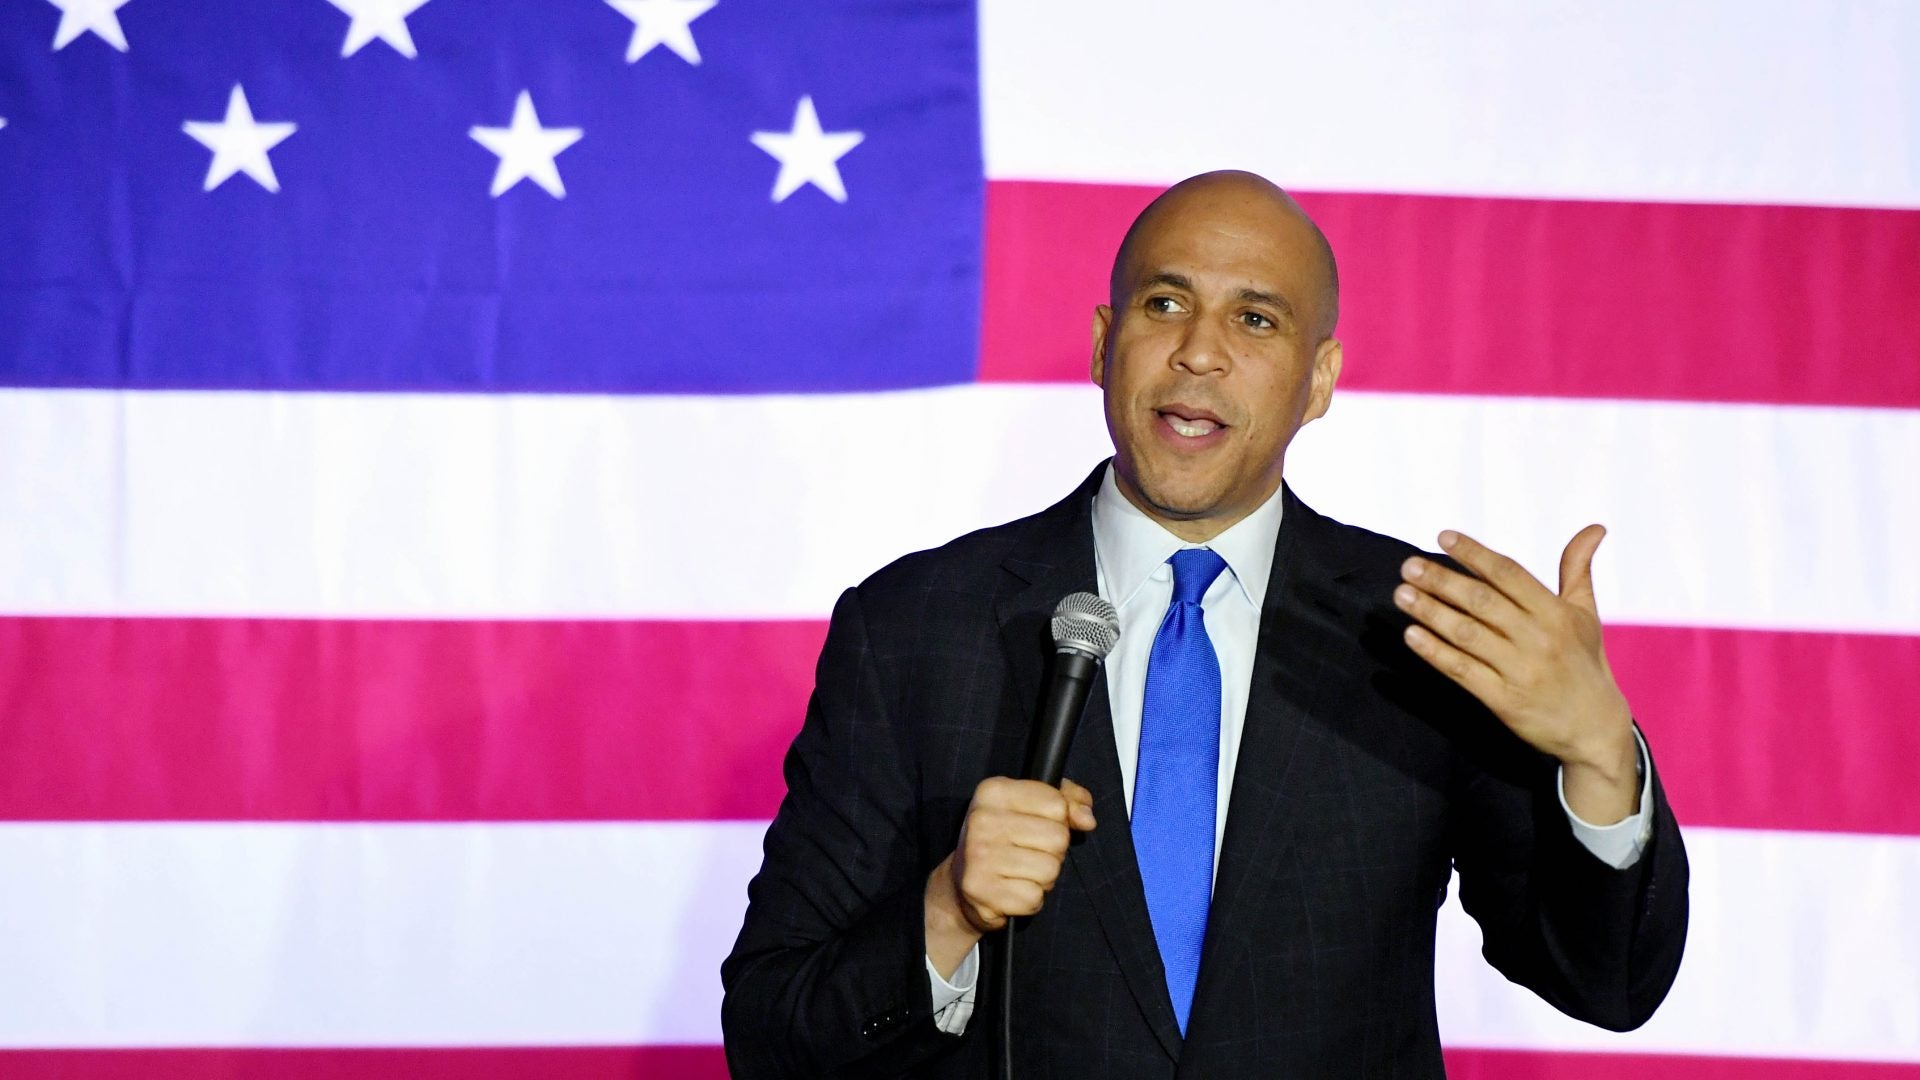 Cory Booker On Juneteenth And Honoring Our Ancestors: 'We Must Pay It Forward'